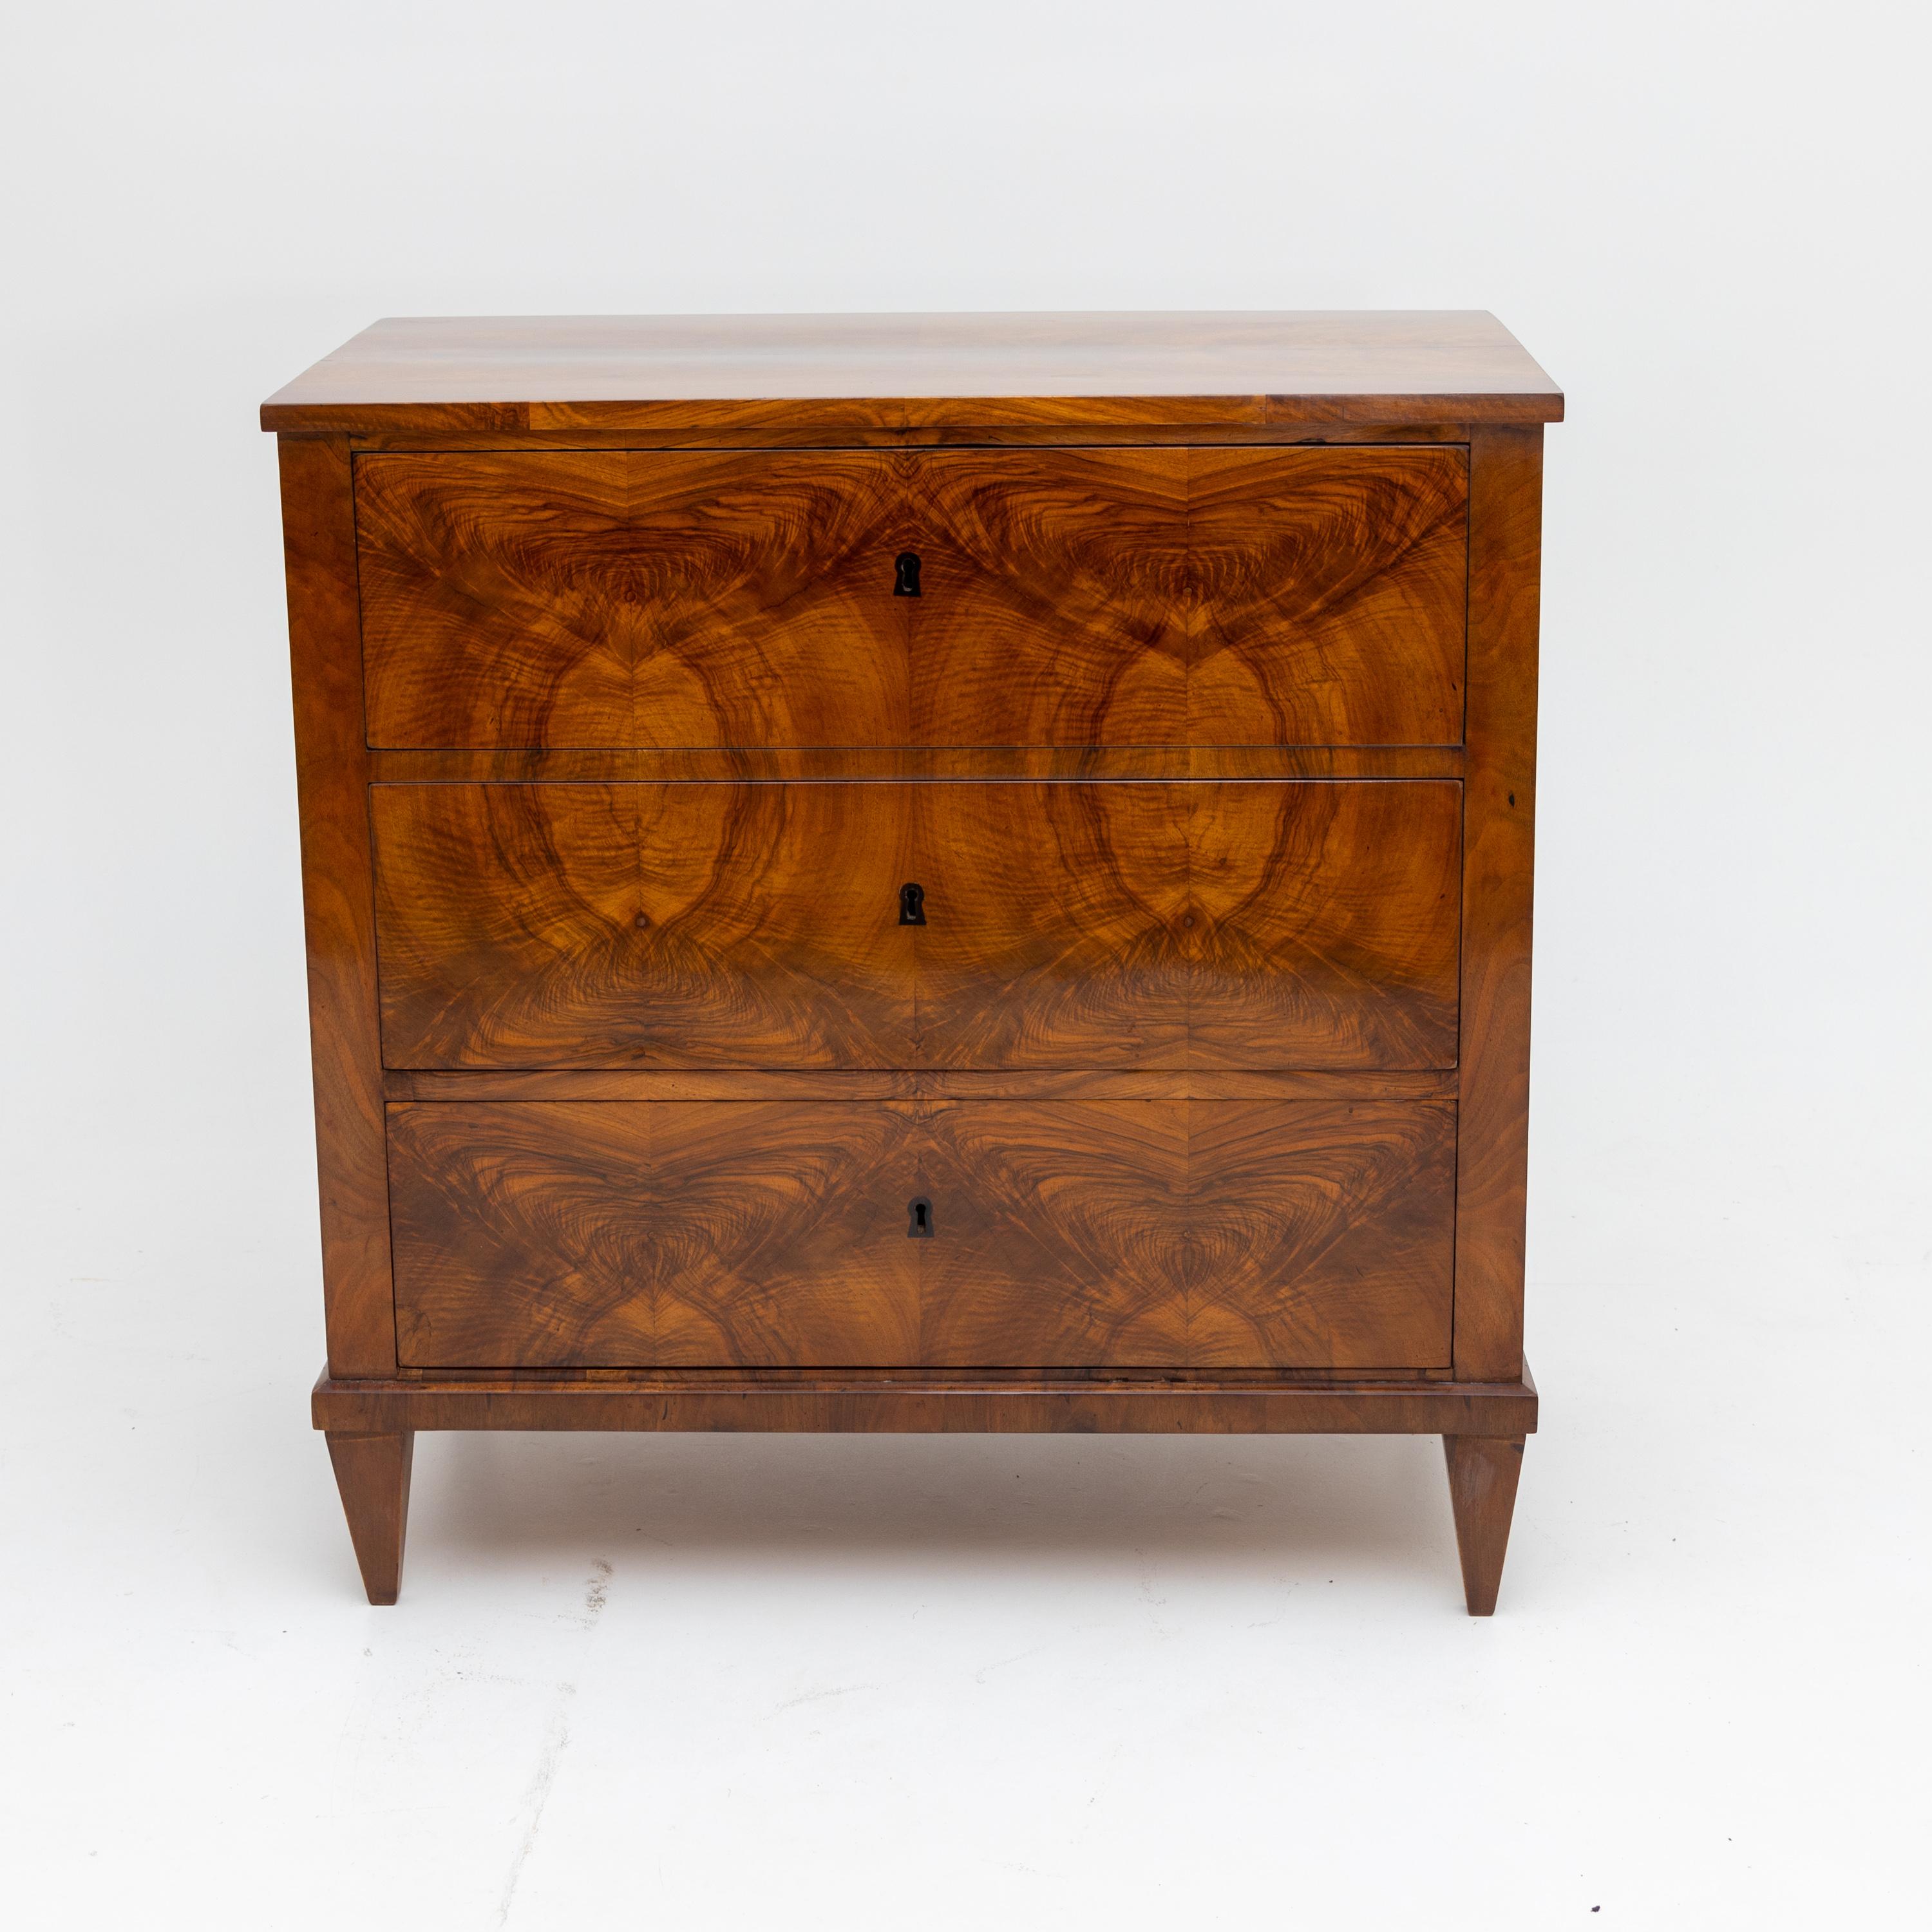 Biedermeier chest of drawers with three drawers and a beautiful walnut veneer pattern.